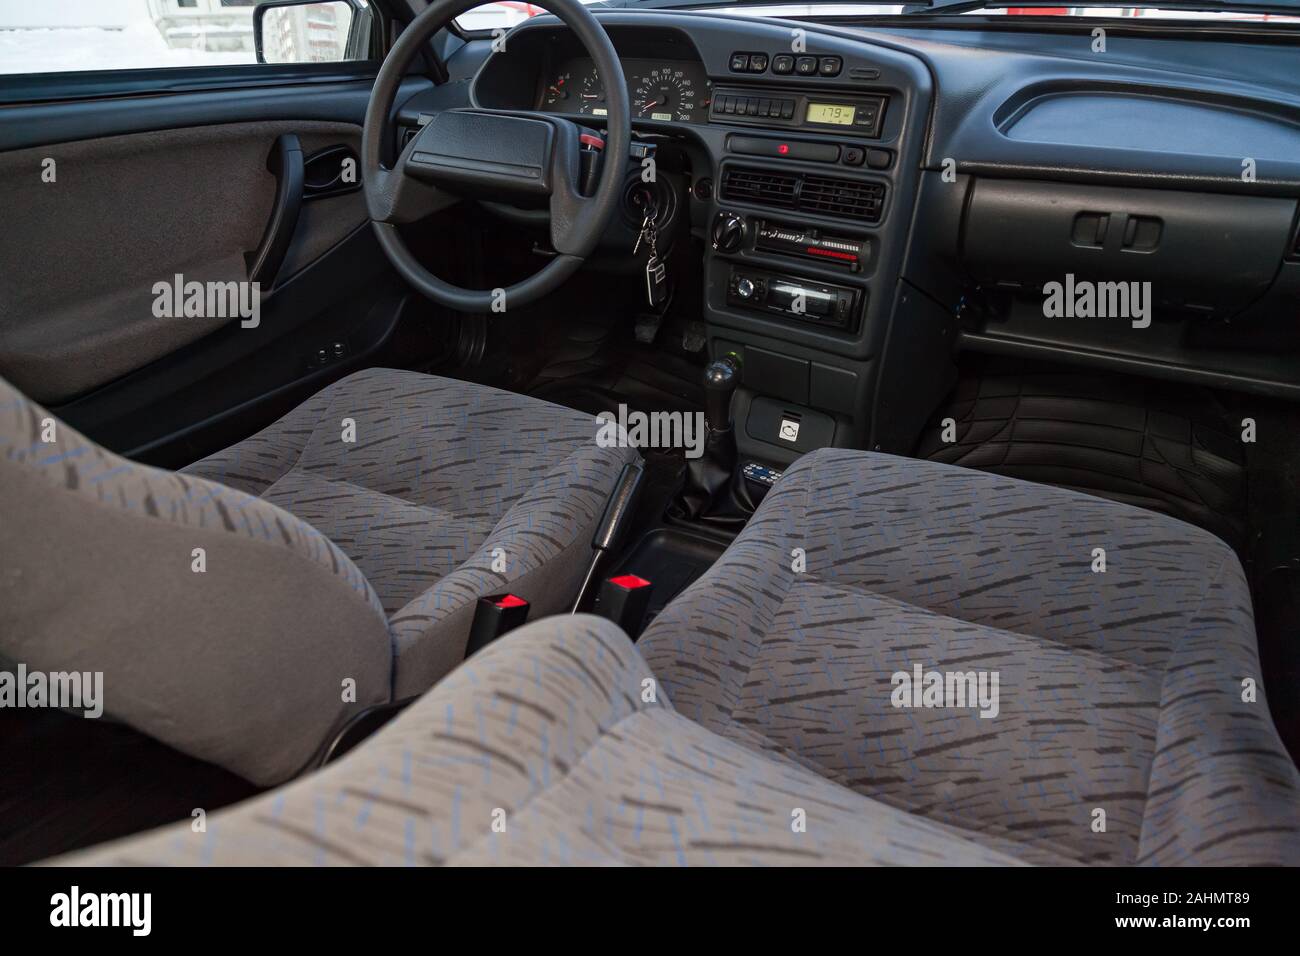 Novosibirsk, Russia - 12.27.2019: The interior of the car lada 2114 samara with a view of the steering wheel, dashboard, seats and multimedia system w Stock Photo